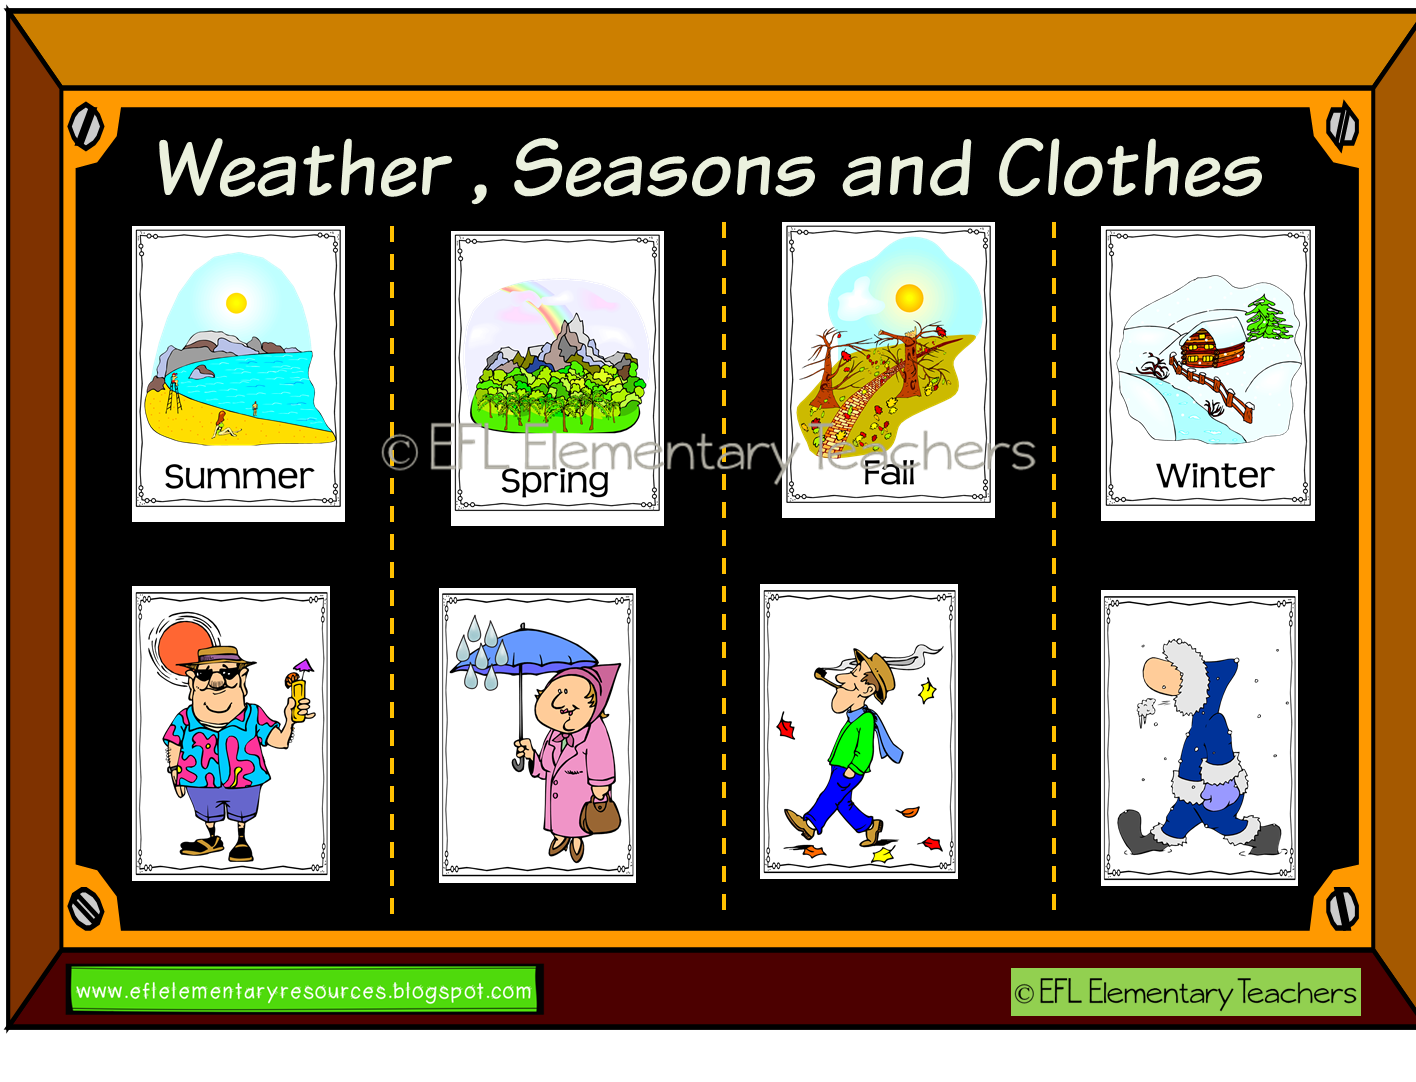 Clothes and weather карточки. Seasons and clothes. Weather and the Seasons. Seasons esl